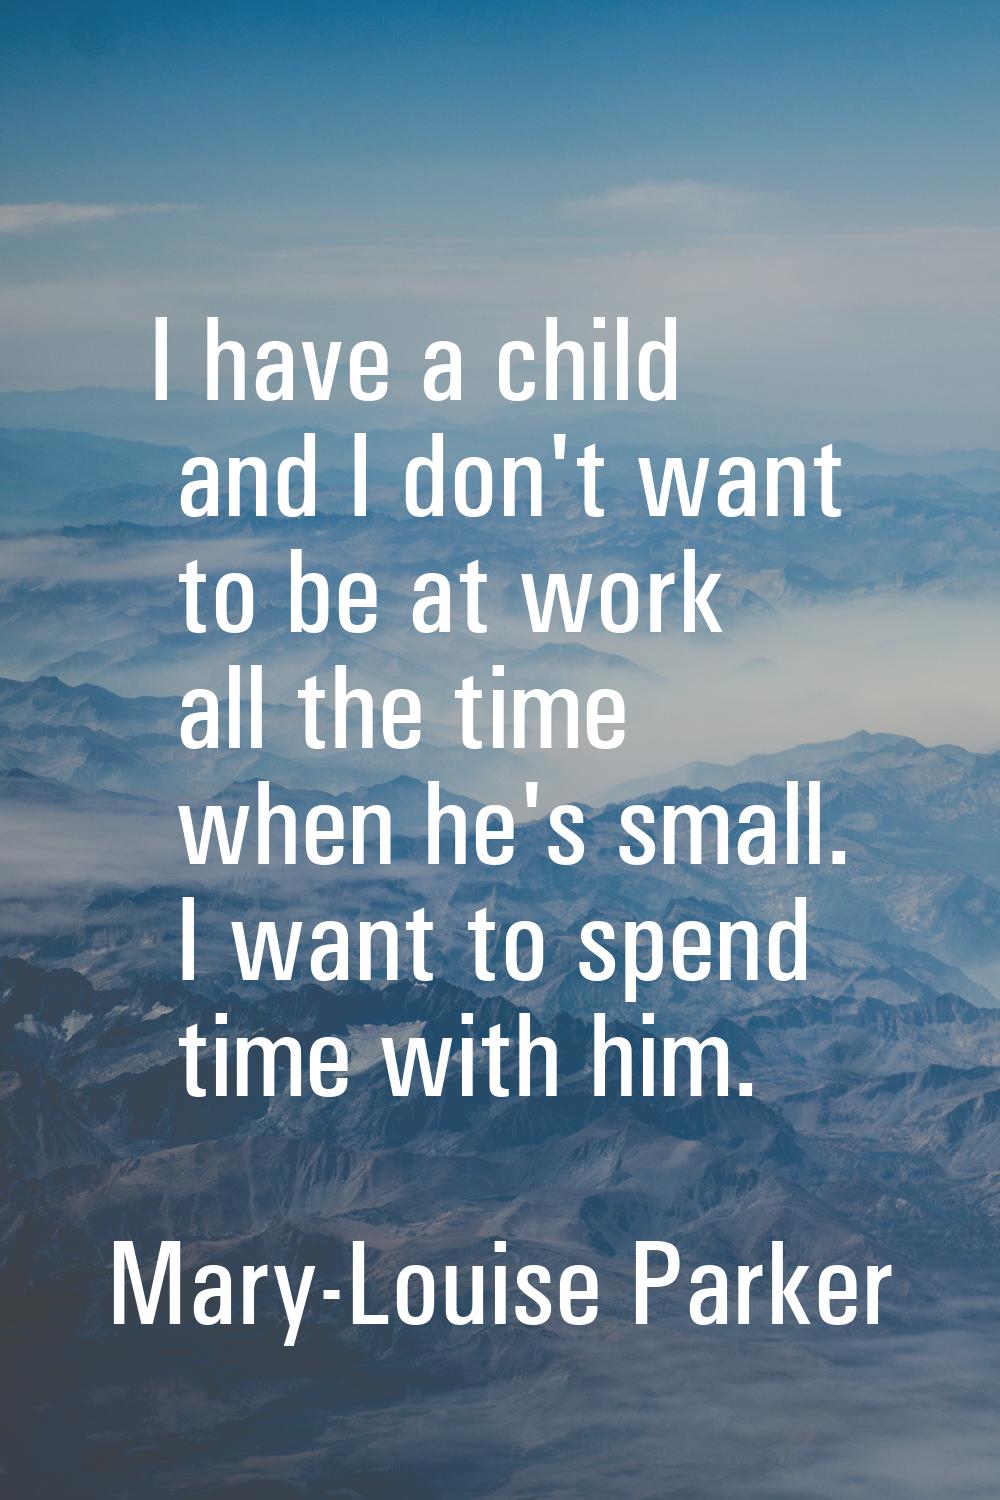 I have a child and I don't want to be at work all the time when he's small. I want to spend time wi